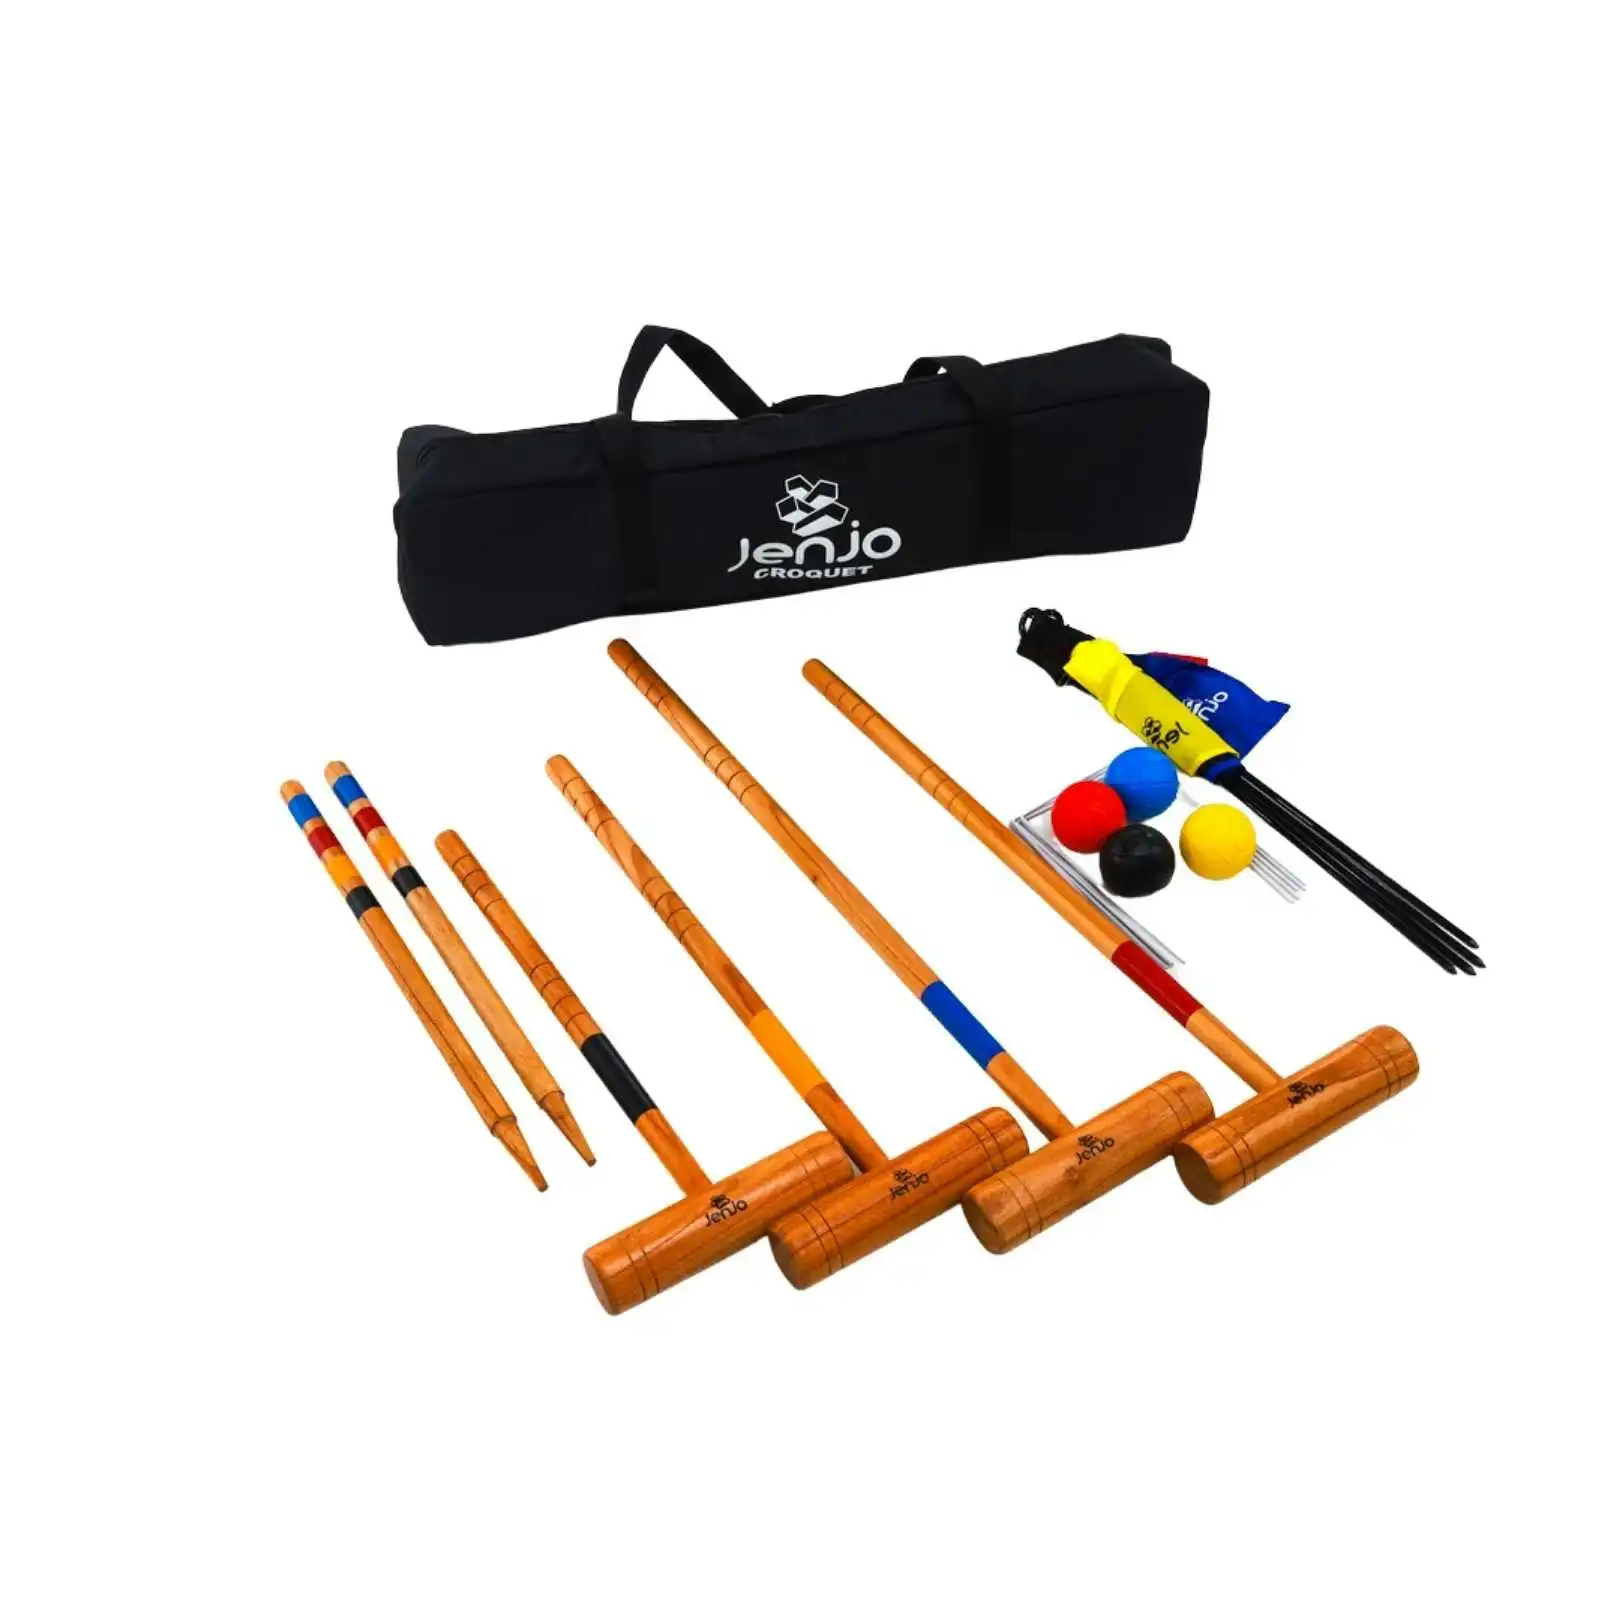 Outdoor Family Premium Wooden Croquet Ball Mallet Game 4 Player Set w/Carry Bag